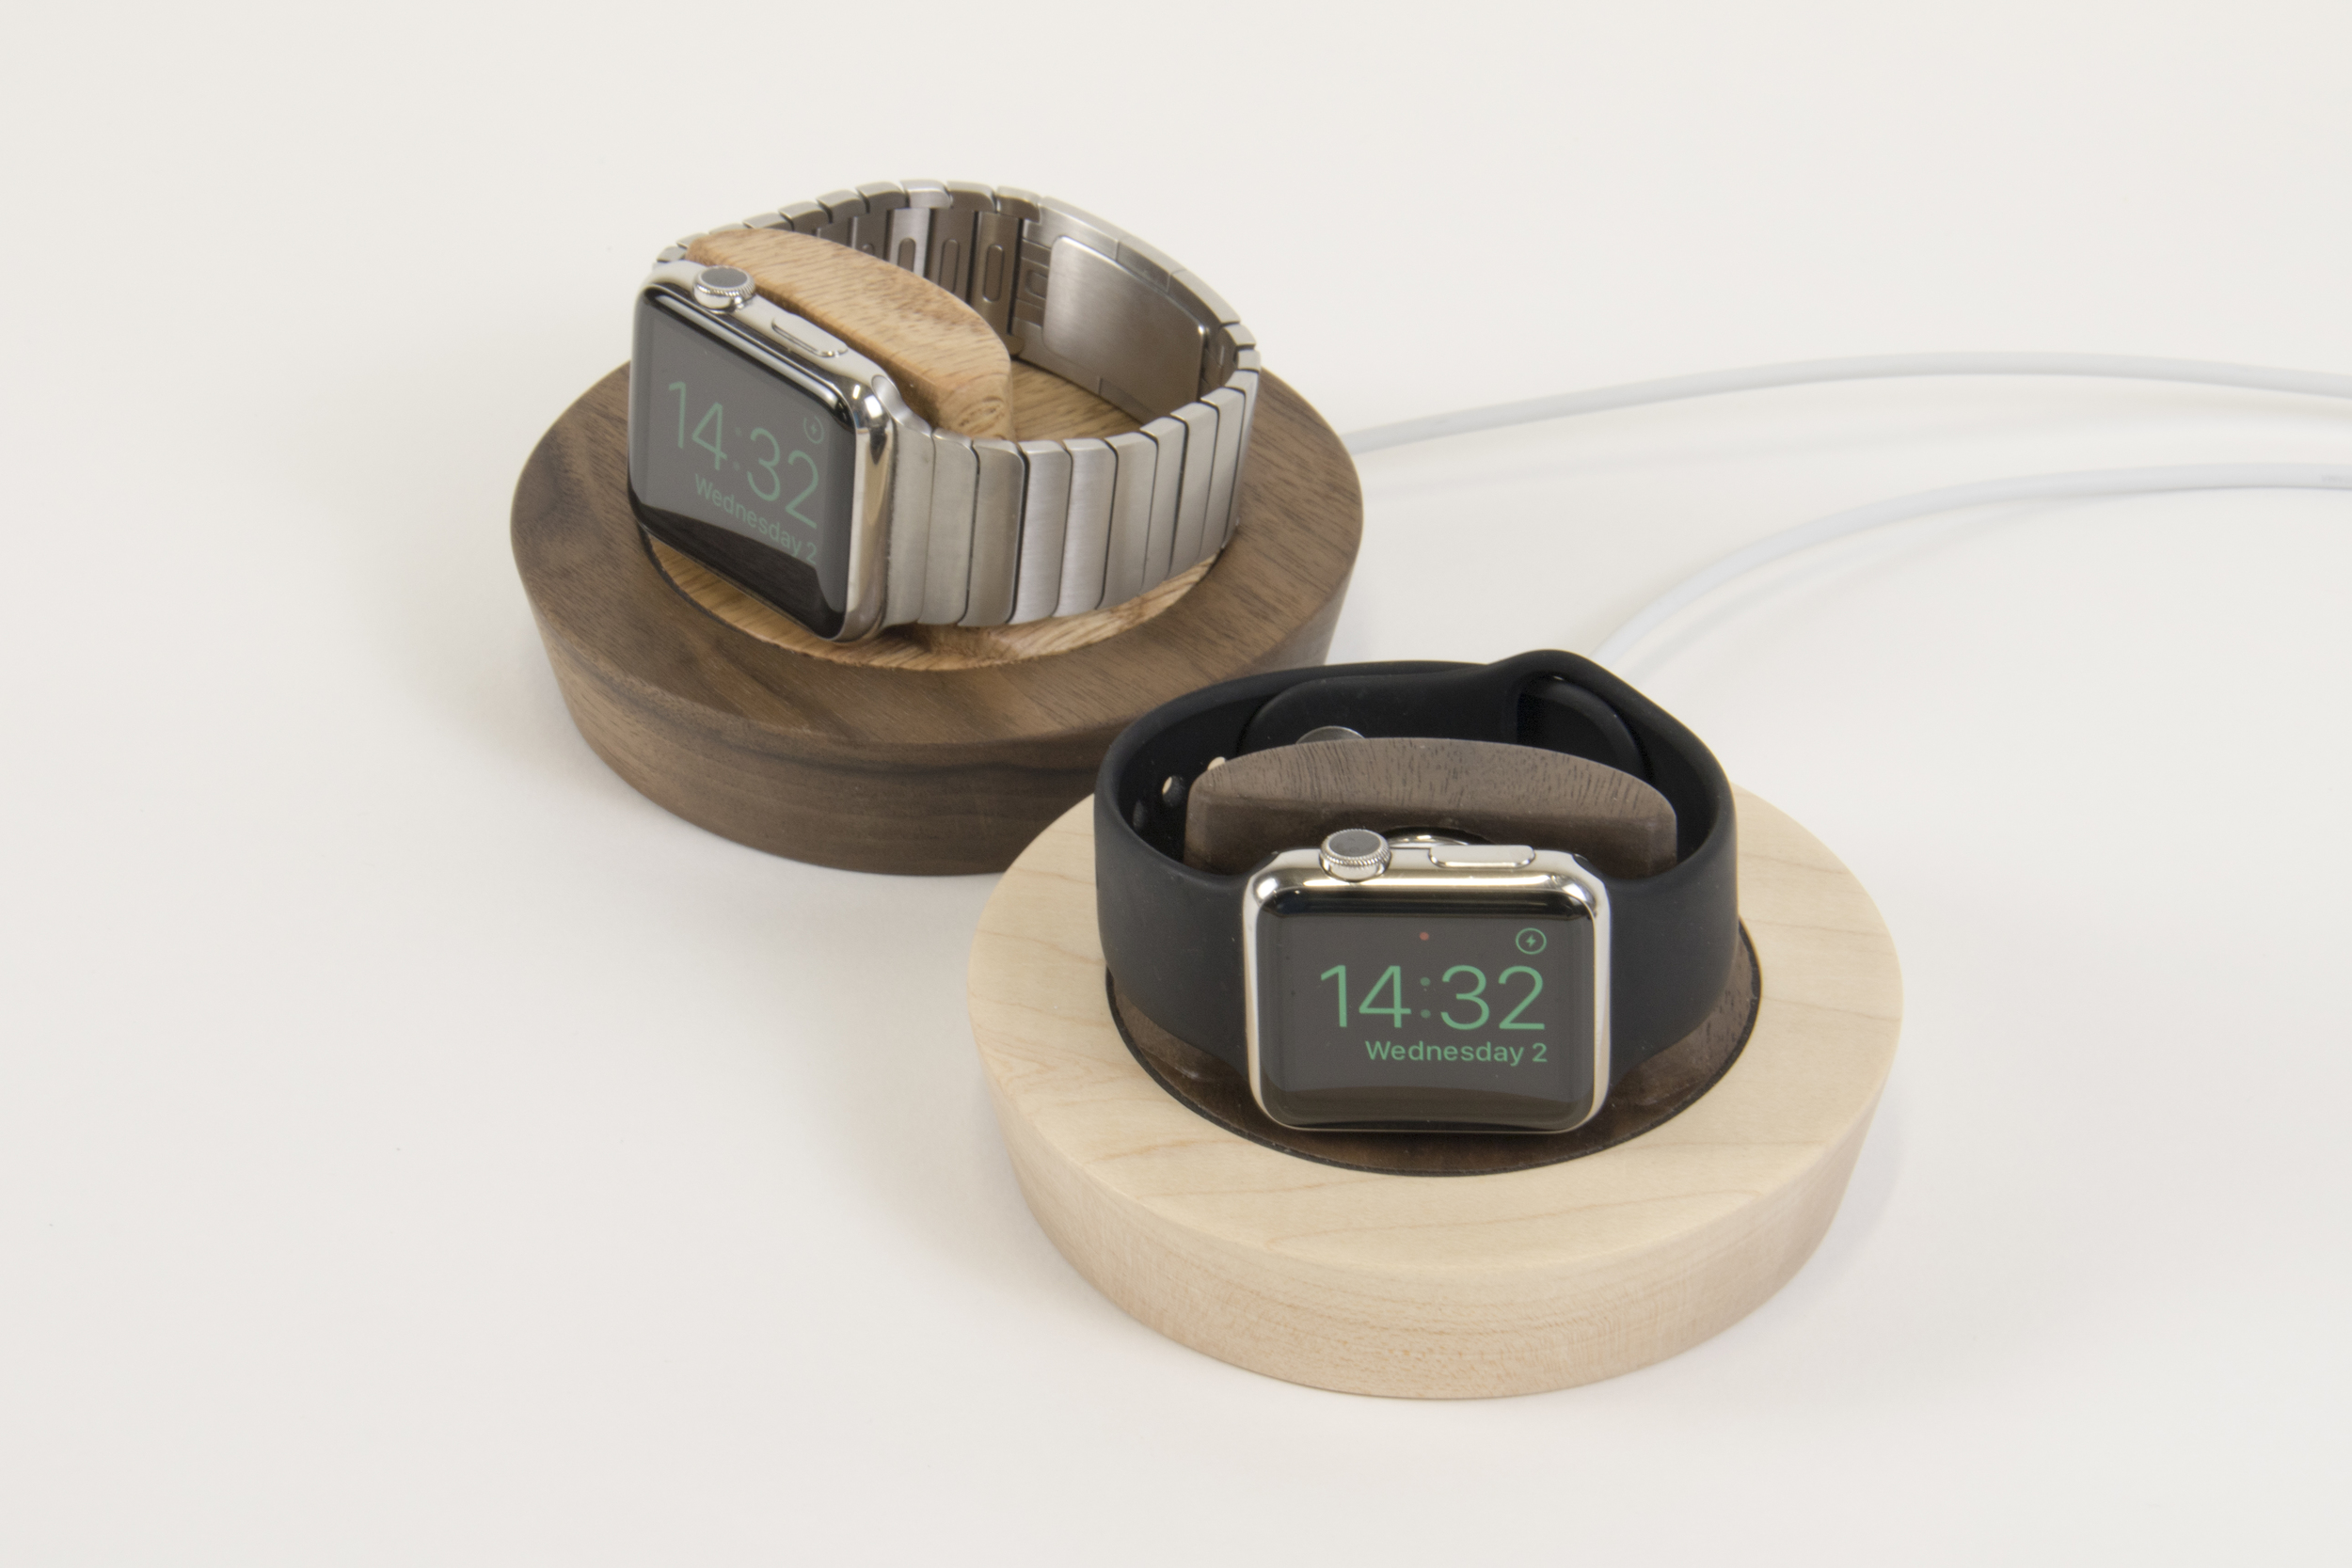 42mm & 38mm Apple Watches on Saucers